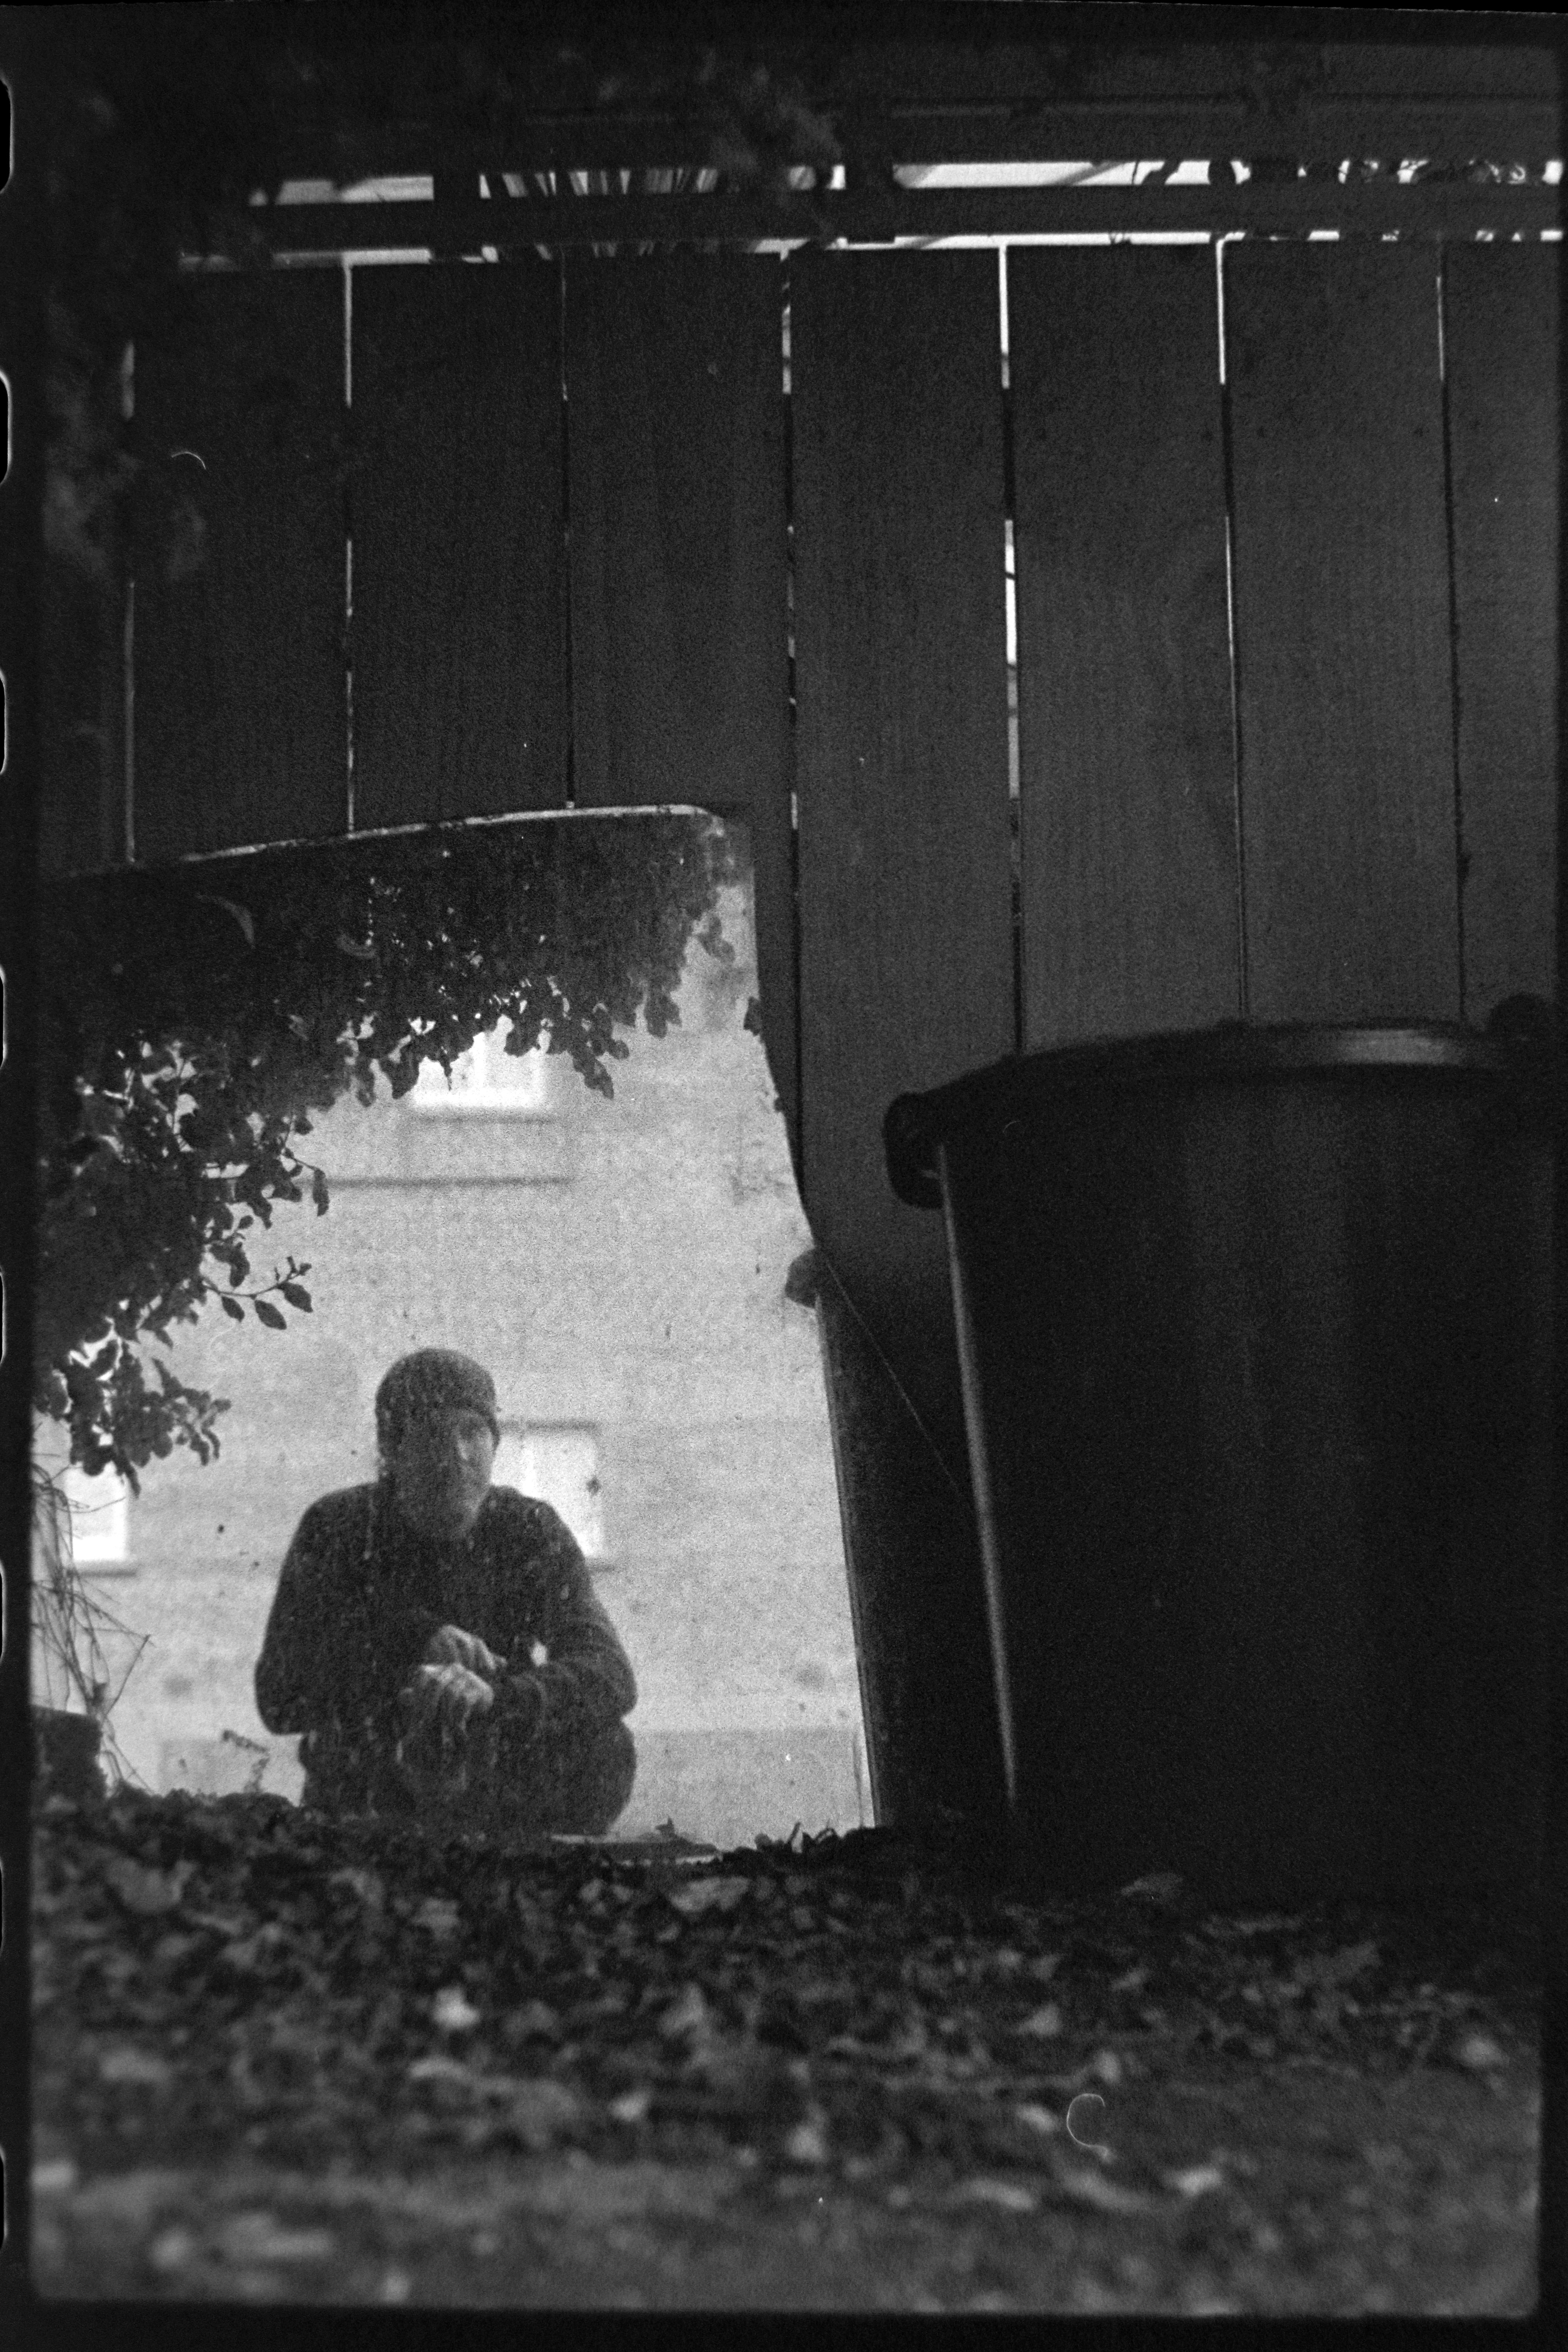 a self portrait of the photographer reflected in a mirror that is outside by some bins.